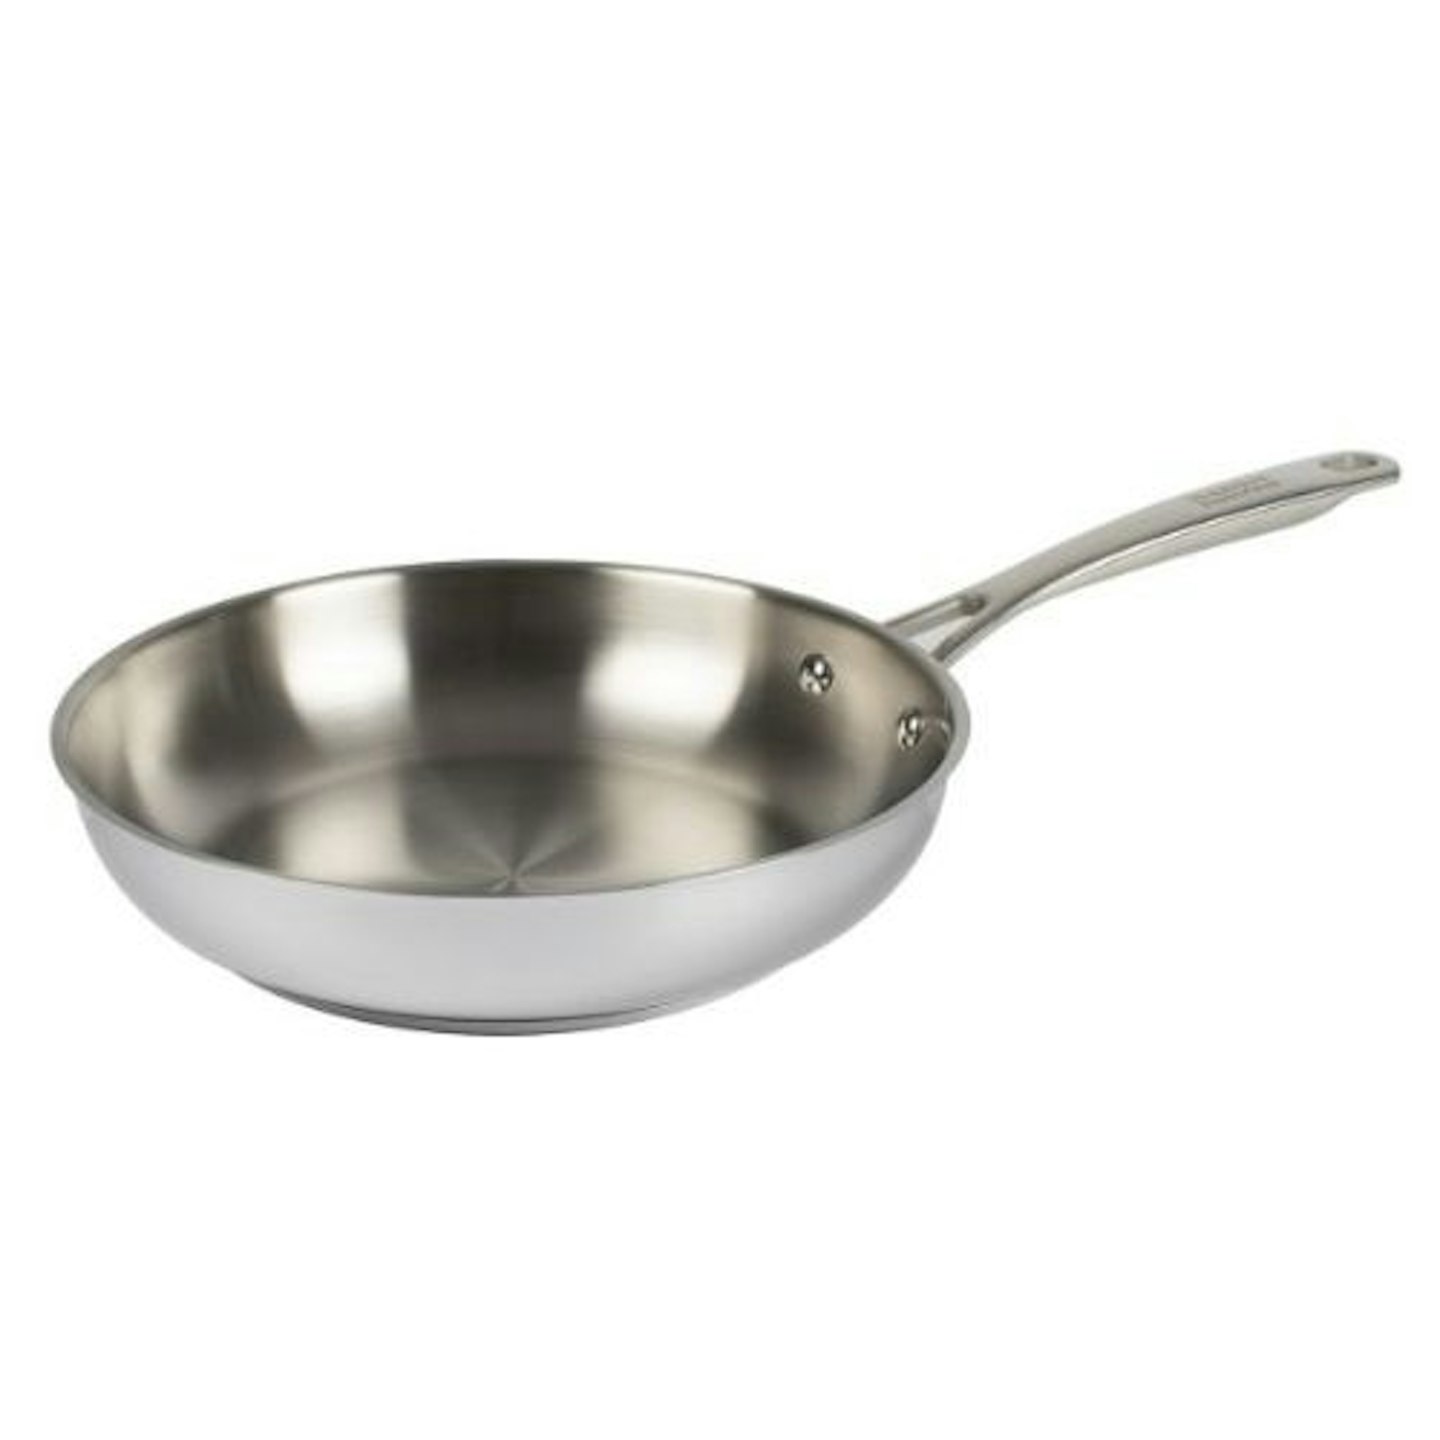 Kuhn Rikon All Round Frying Pan Uncoated